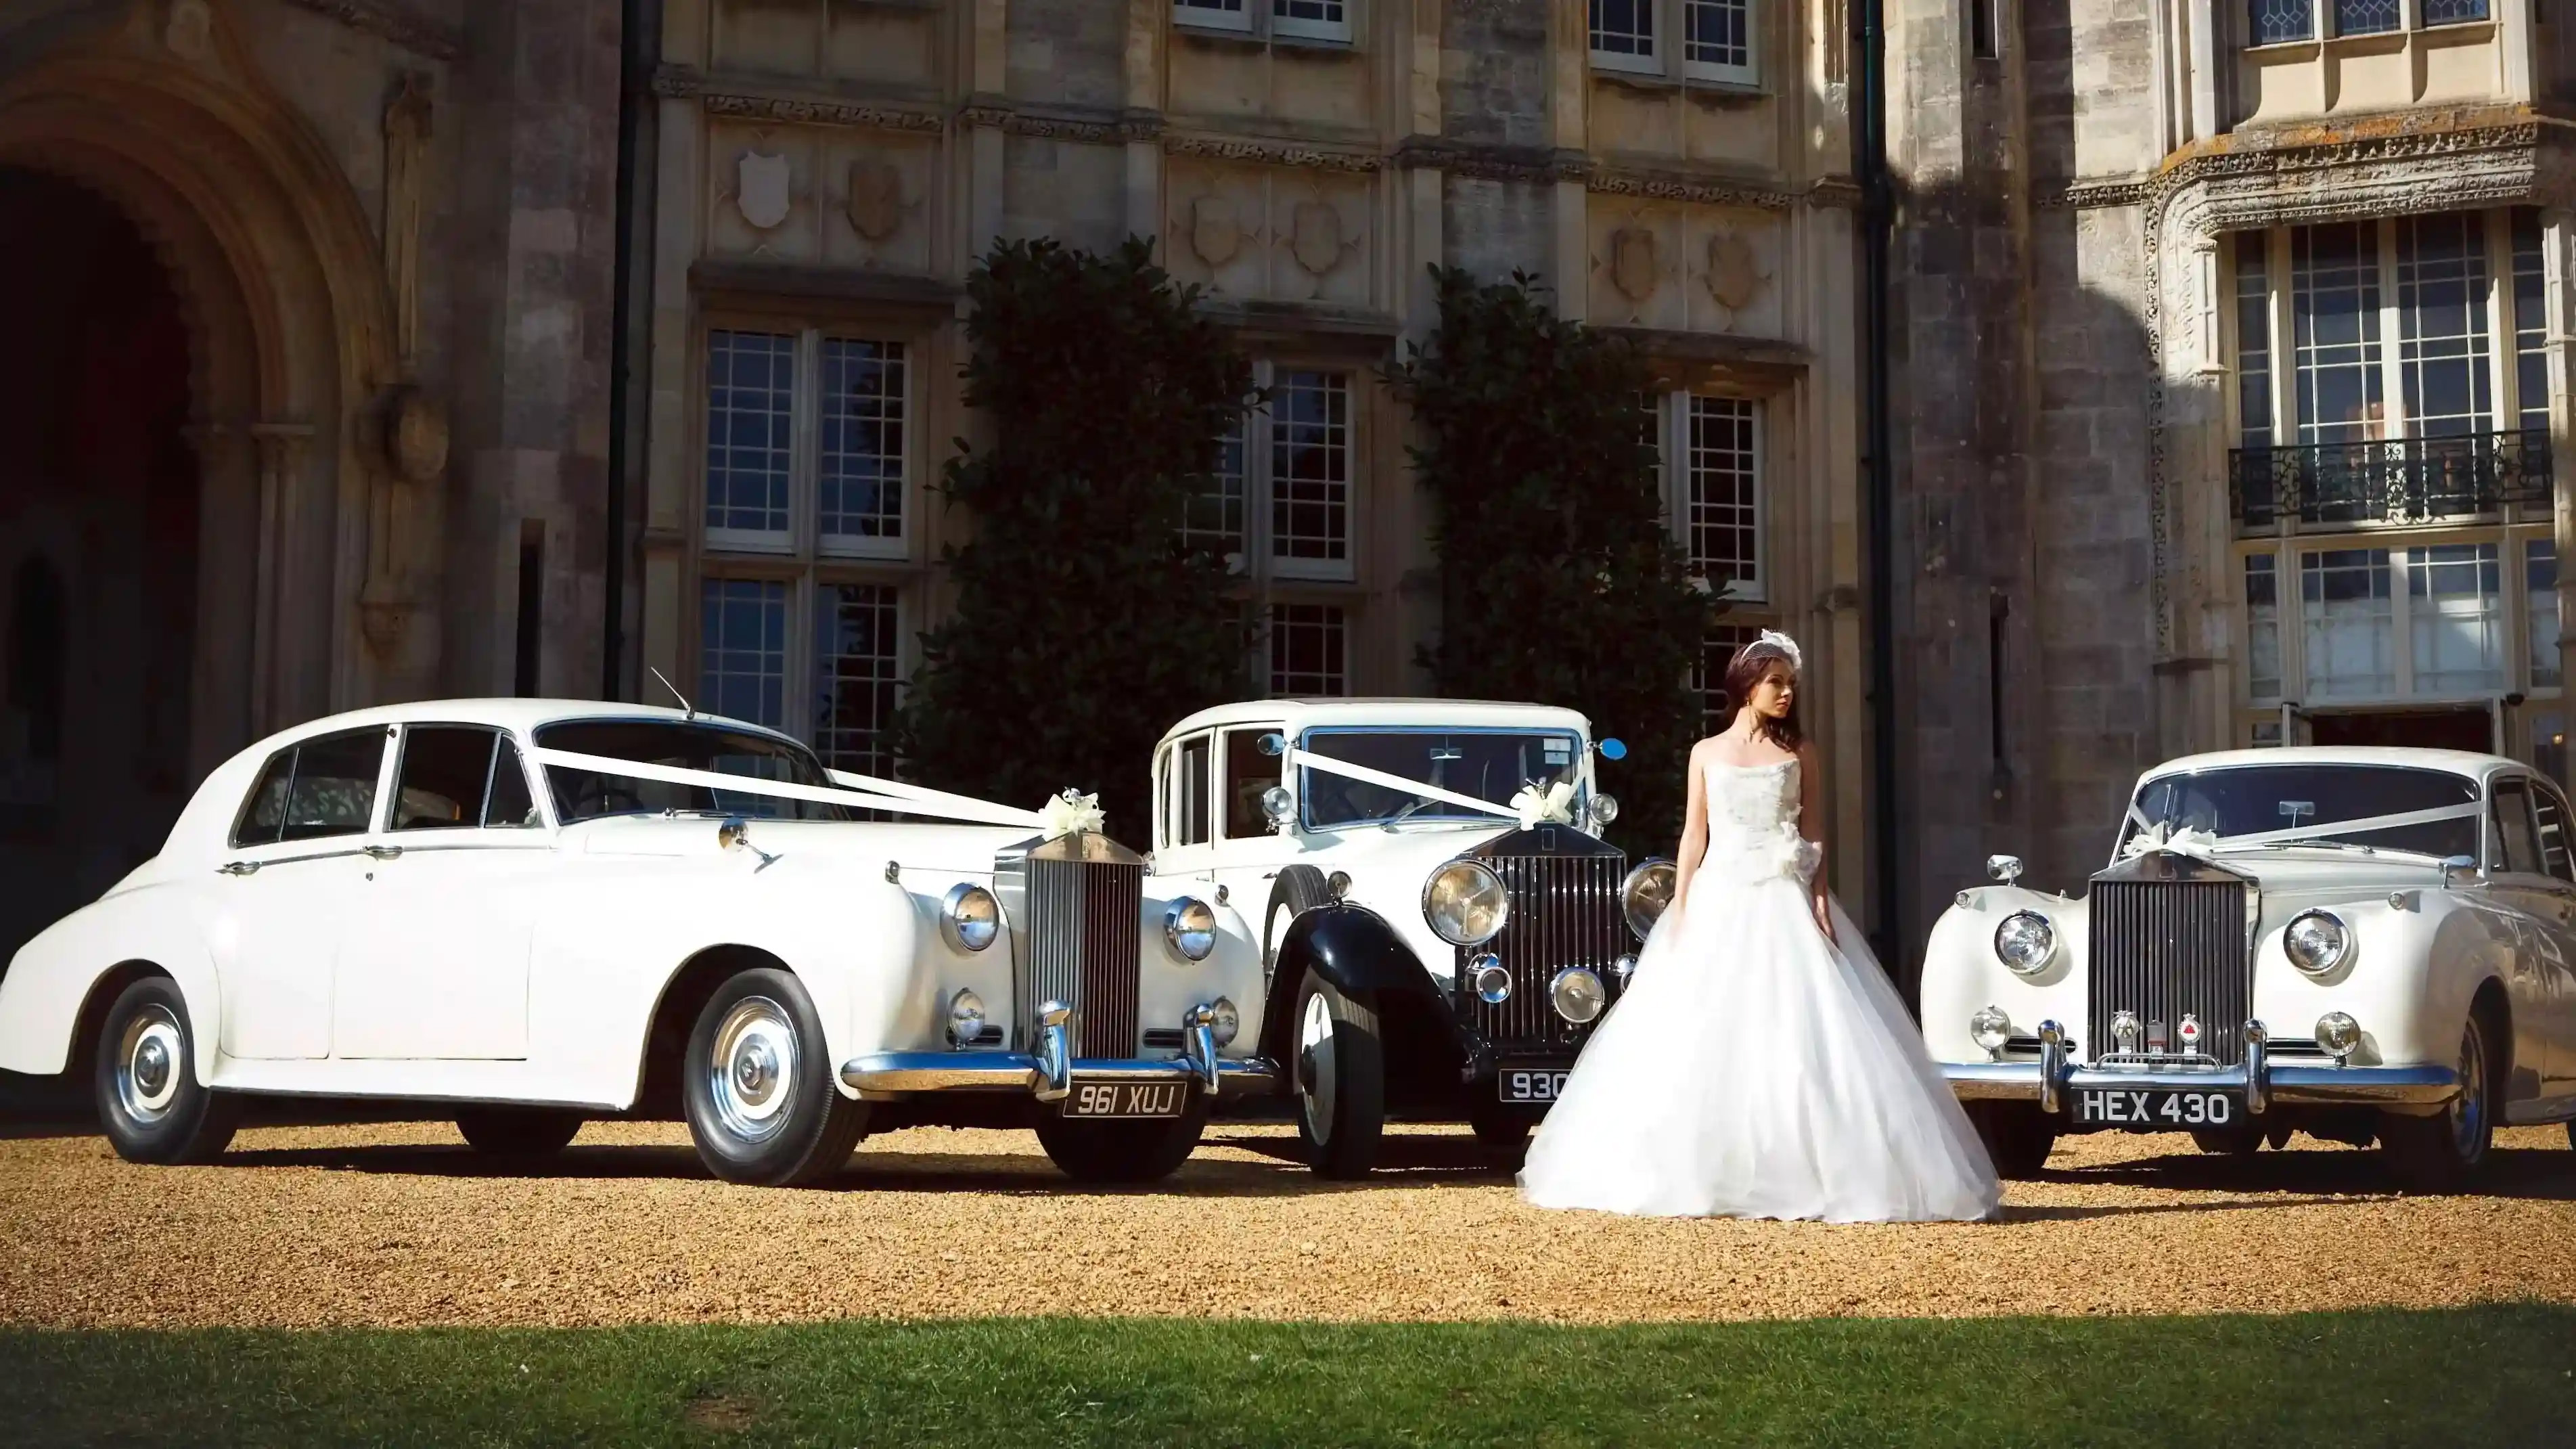 Selection of three classic and Vintage Rolls-Royce in White with Bride wearing a white wedding dress standing in the middle of the vehicles. Background is a popular wedding venue in the style of a castle in Rutland